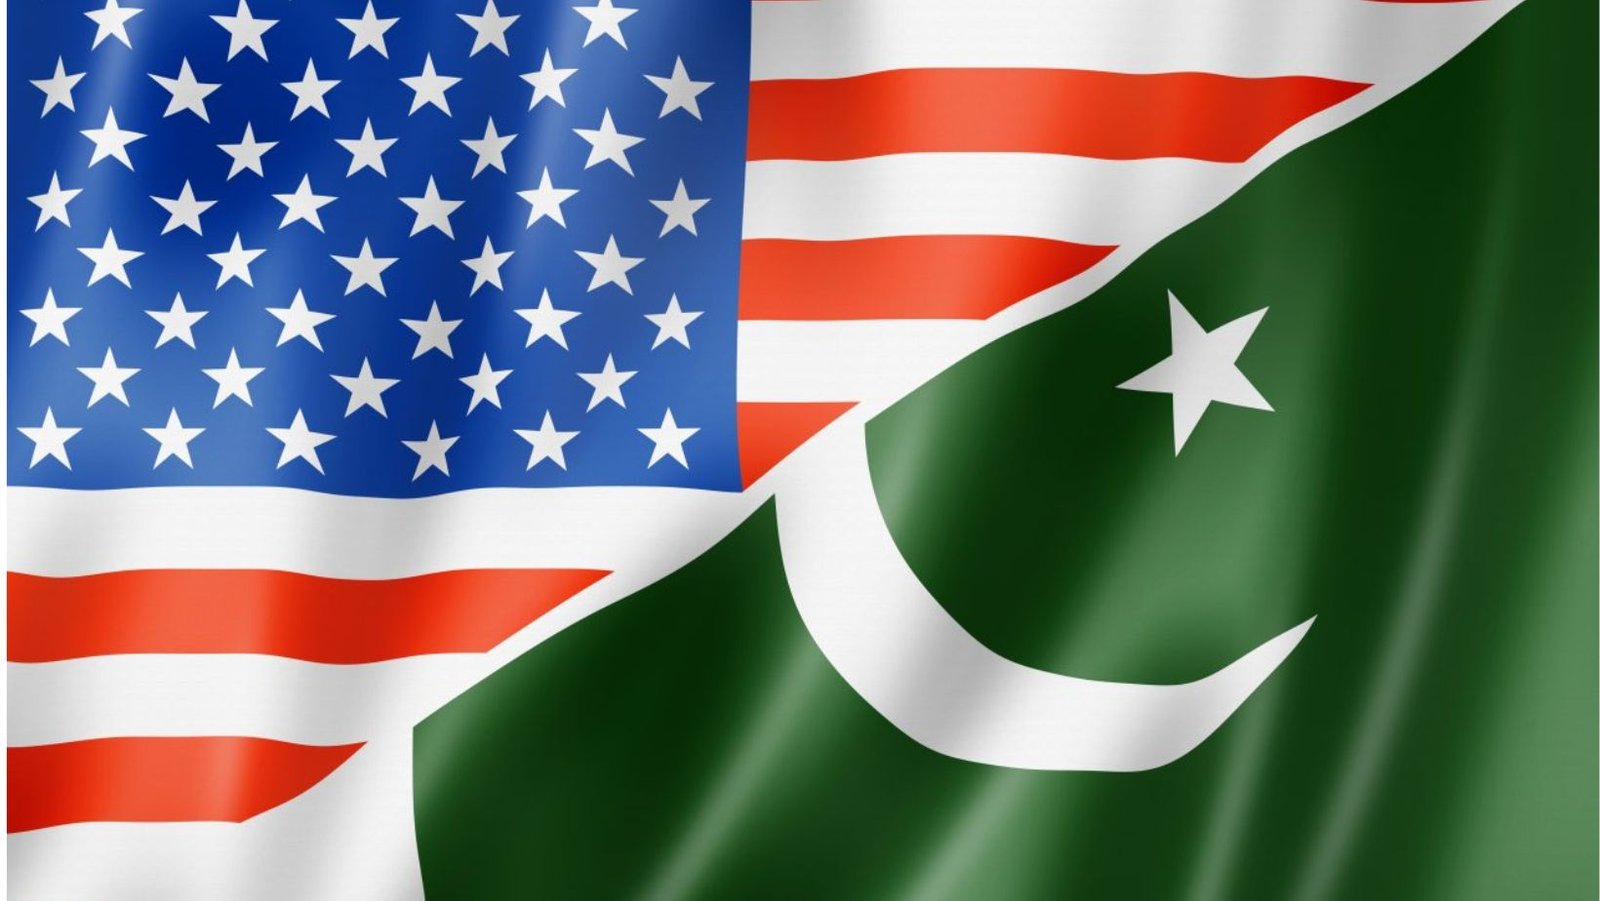 Pakistan and the US Commit to Working Together to Combat Pandemics and Health Security Issues